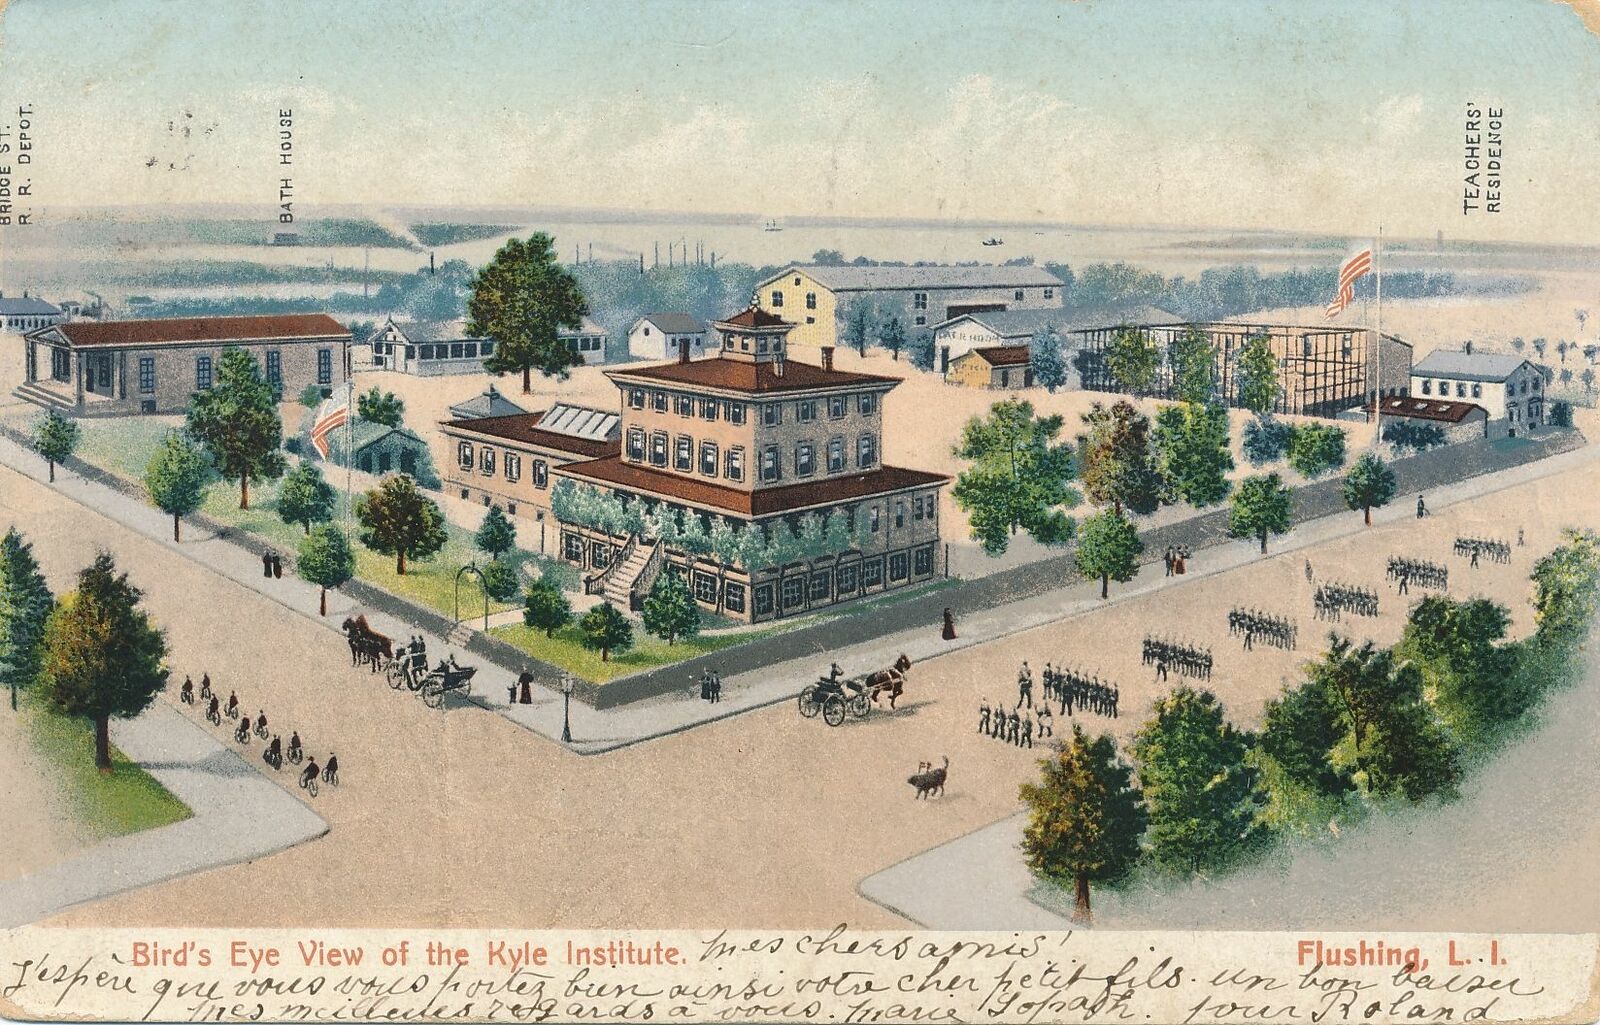 FLUSHING QUEENS NY - The Kyle Institute Birdseye View - udb - 1907